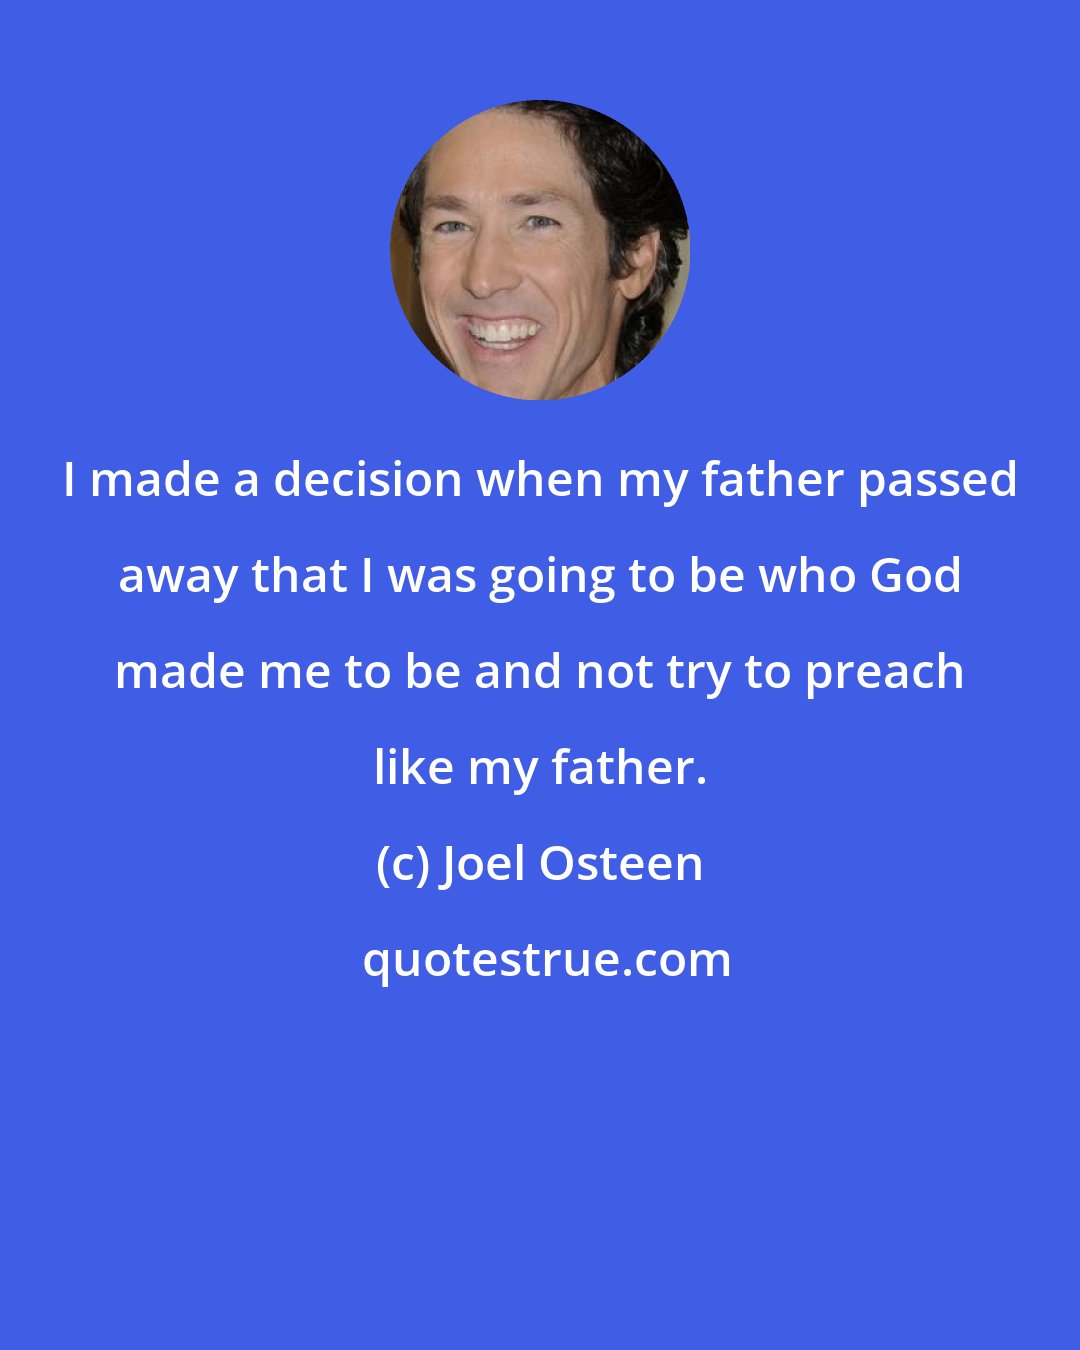 Joel Osteen: I made a decision when my father passed away that I was going to be who God made me to be and not try to preach like my father.